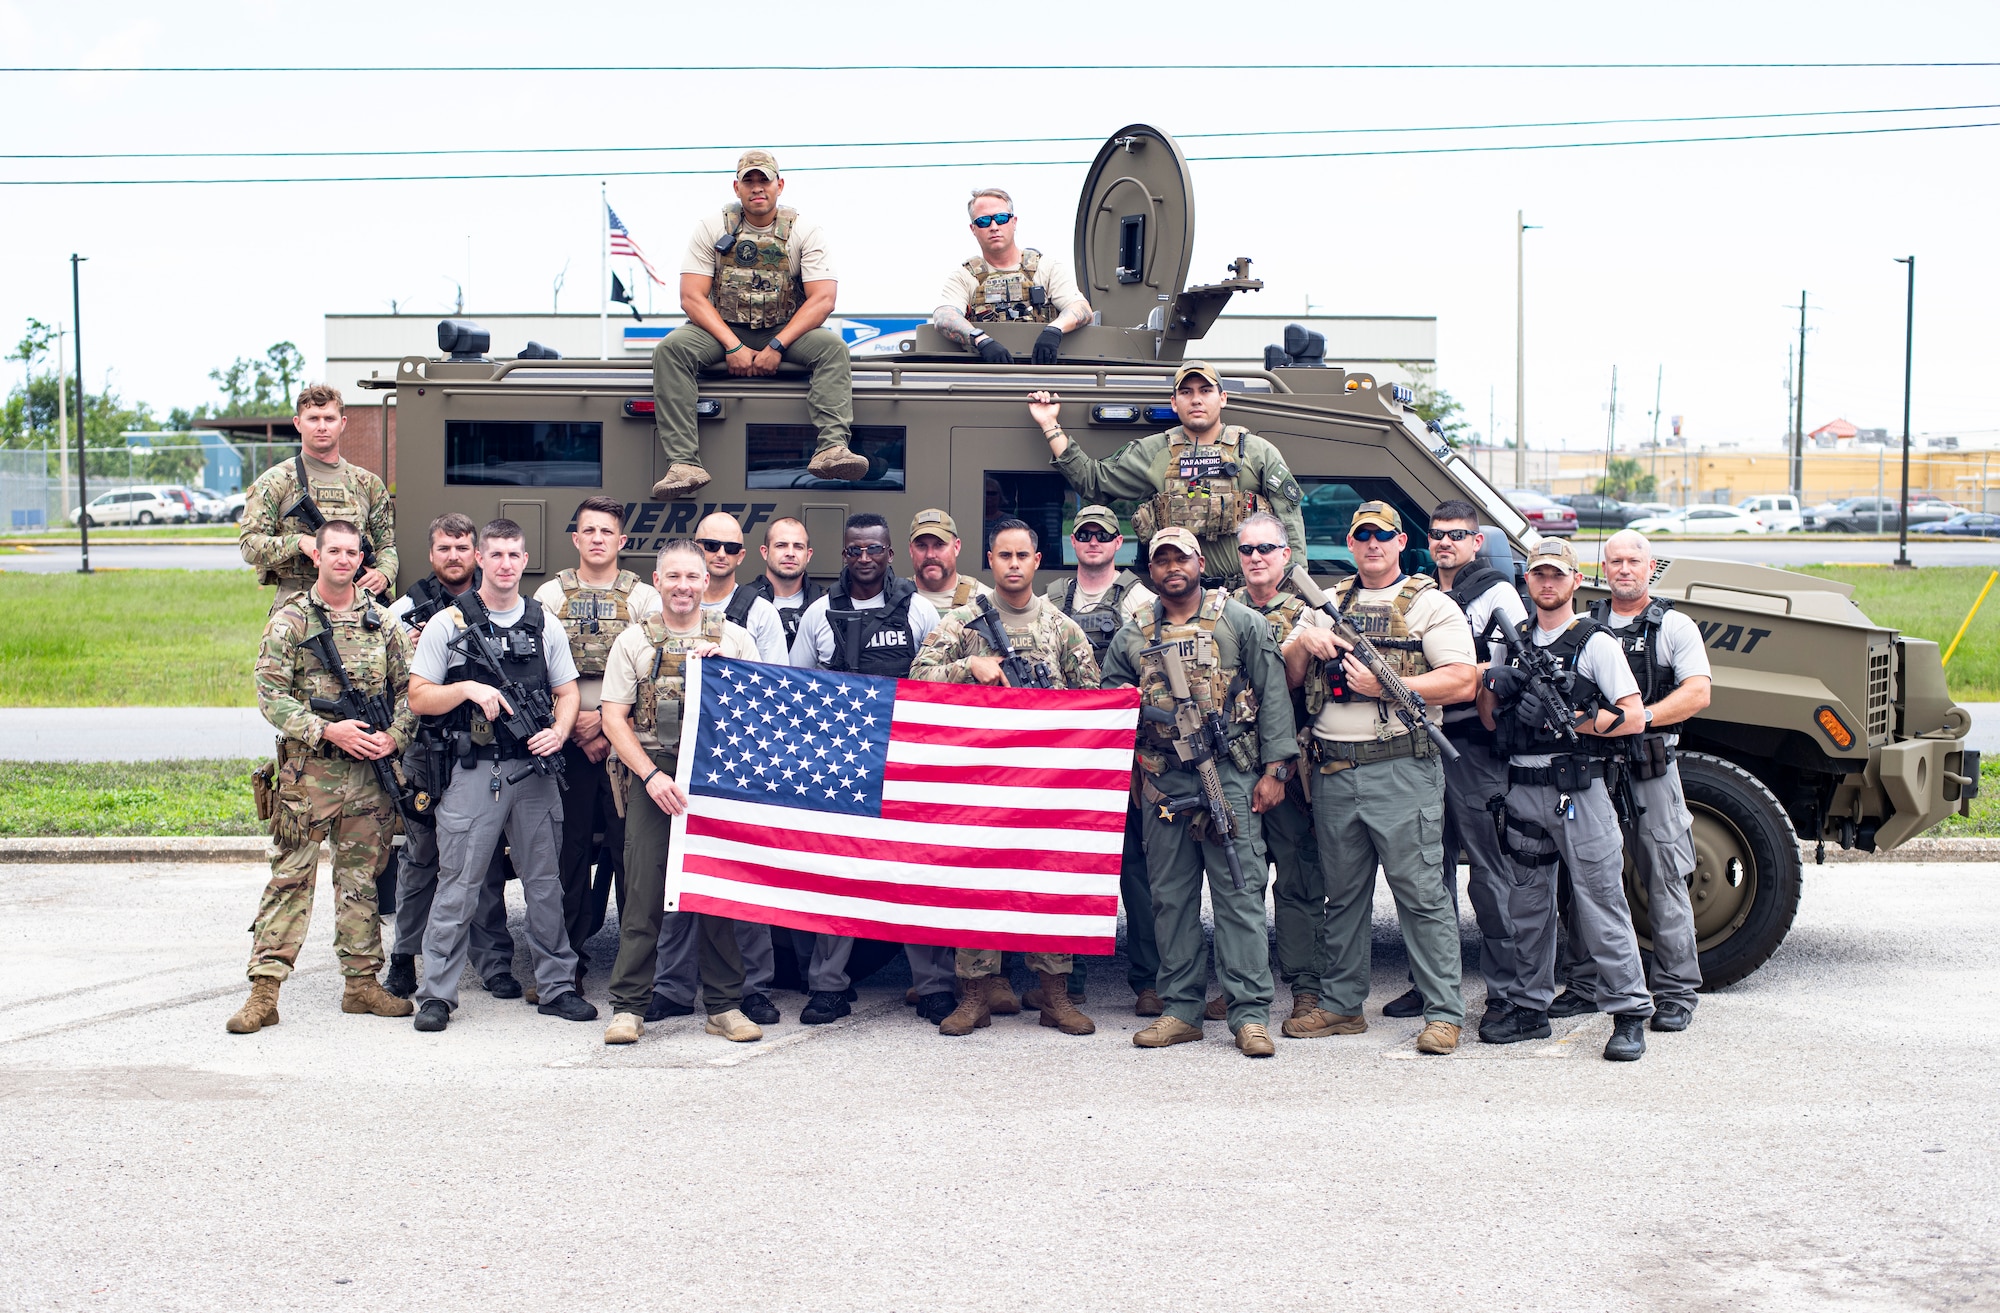 Members from the 325th Security Forces Squadron tactical response team and Bay County Sheriff’s Office and Panama City Police Department special weapons and tactics teams pose for a photo in Panama City, Florida, July 13, 2021. The three agencies trained together to share tactics and experience from both military and civilian police careers in order to become more well-rounded units. (U.S. Air Force photo by Staff Sgt. Stefan Alvarez)